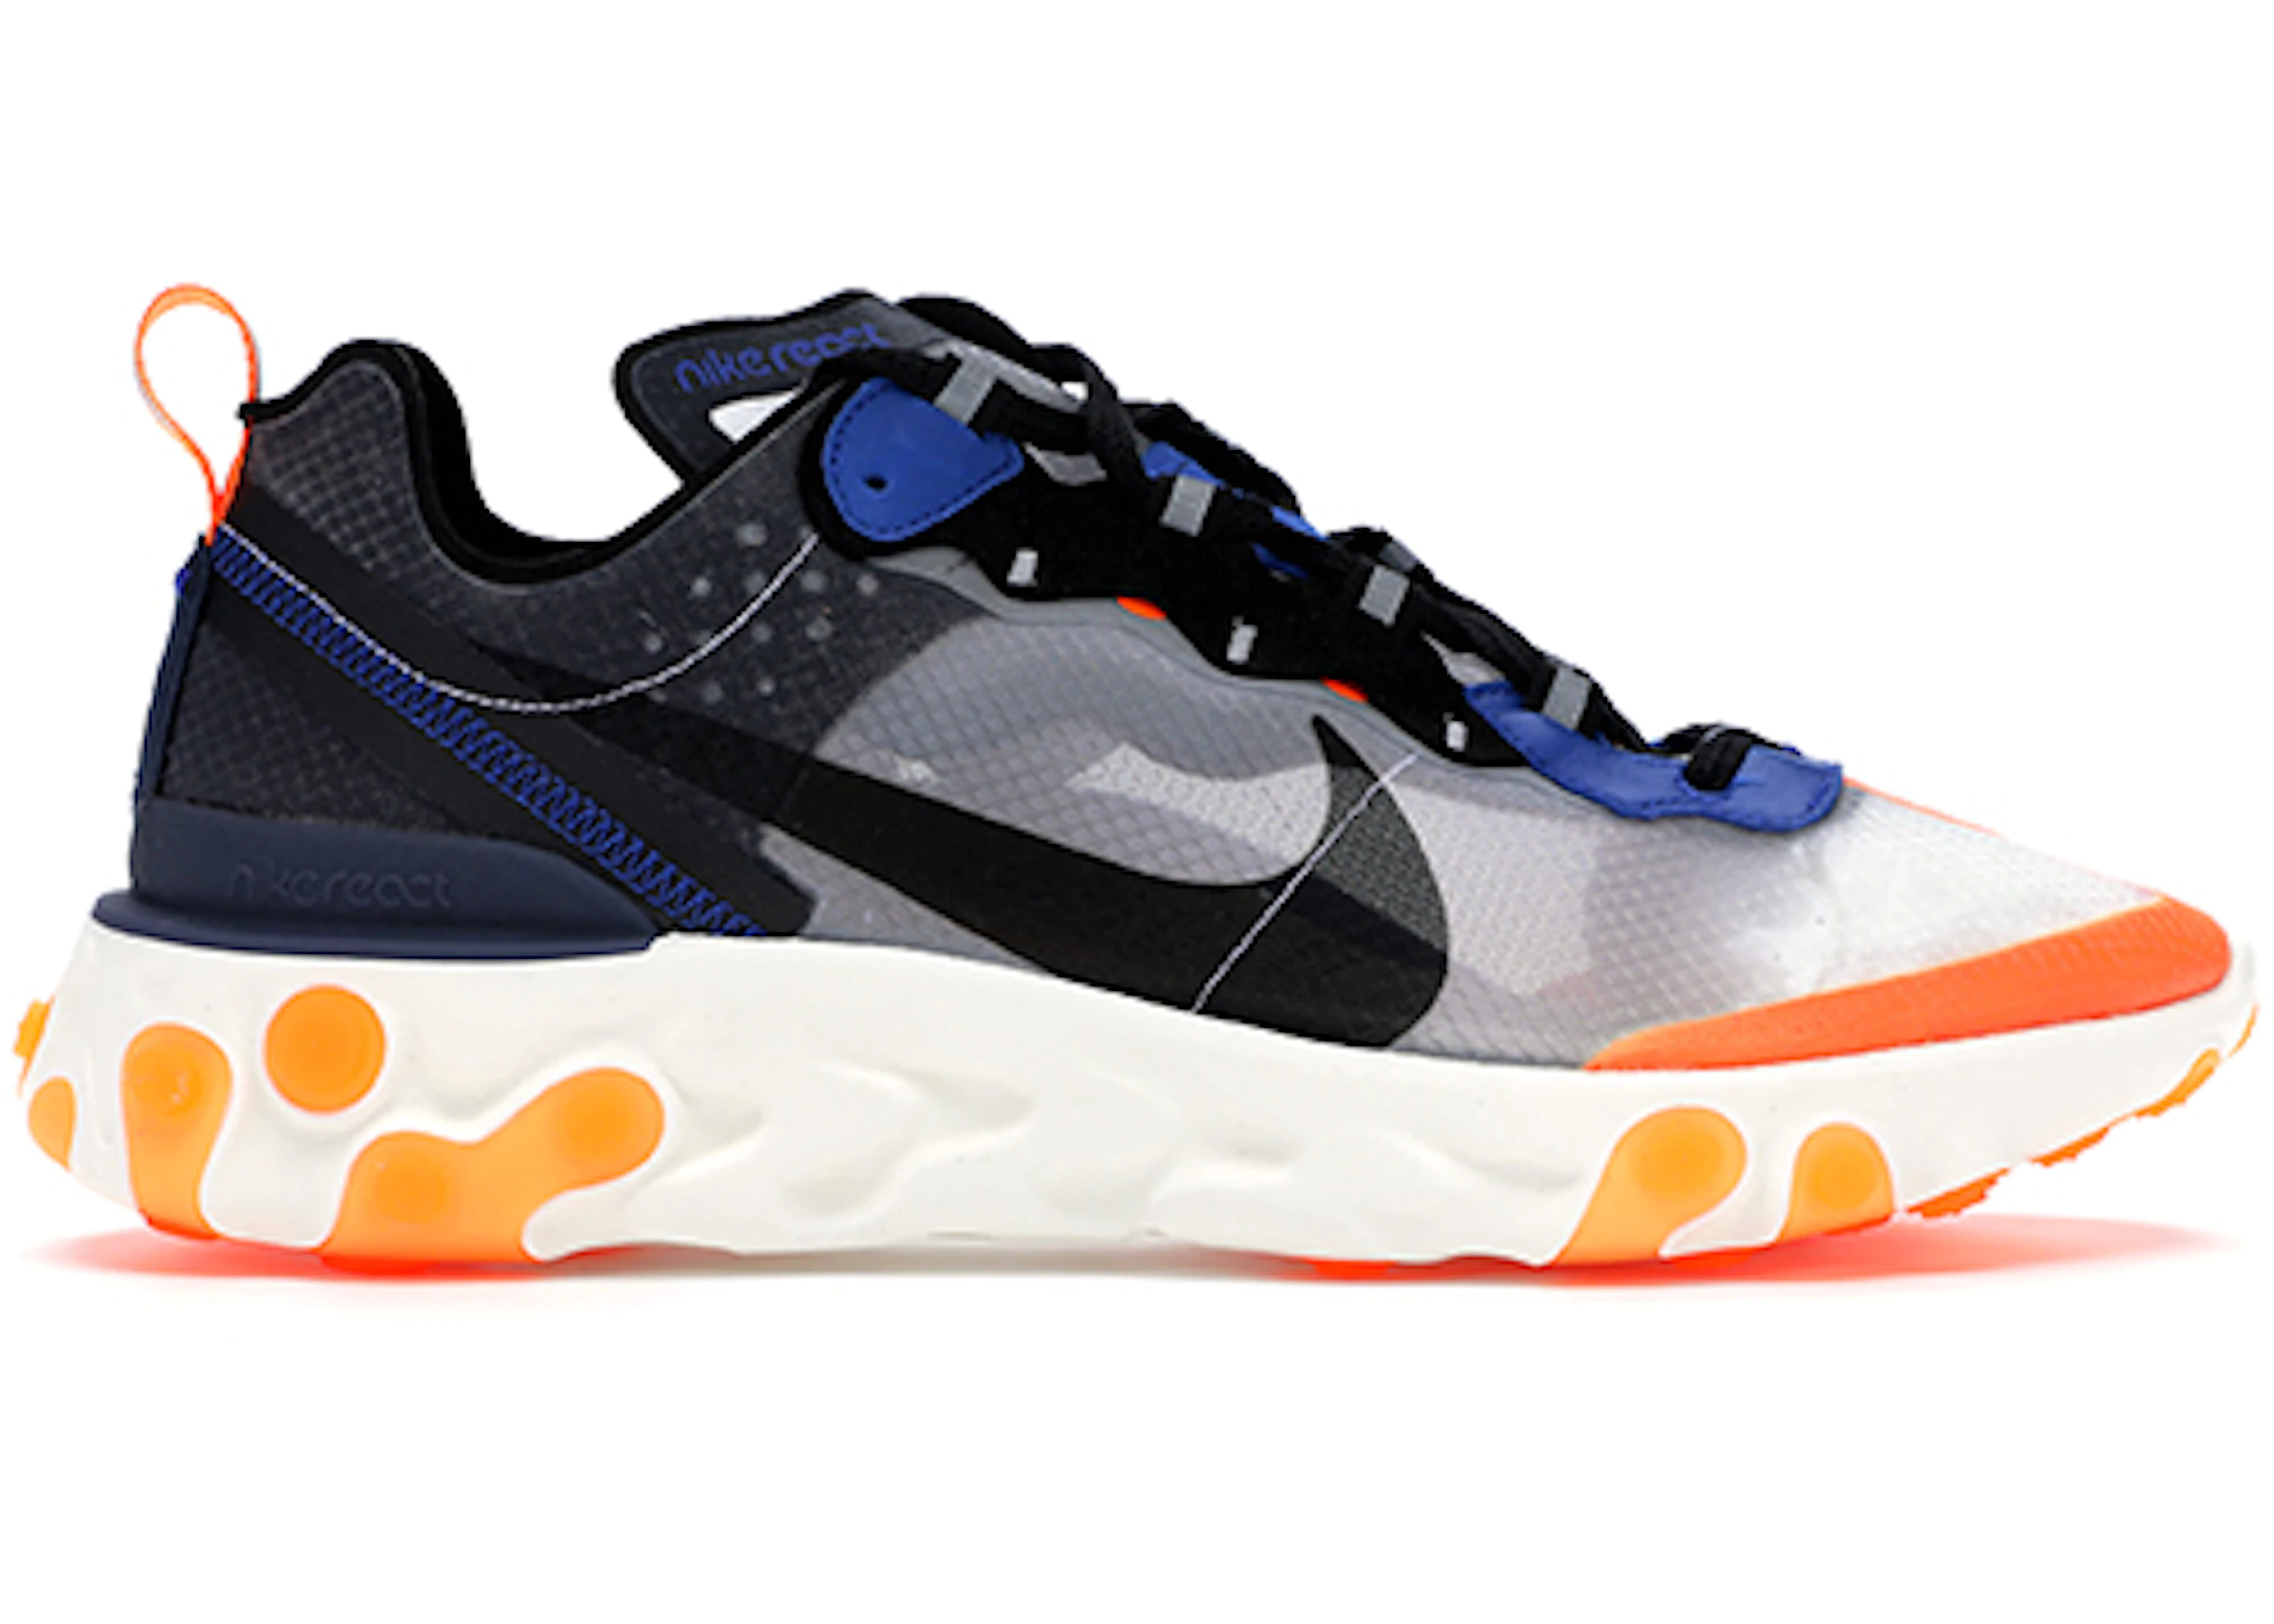 Dew gain Blossom Buy Nike React Element Shoes & New Sneakers - StockX